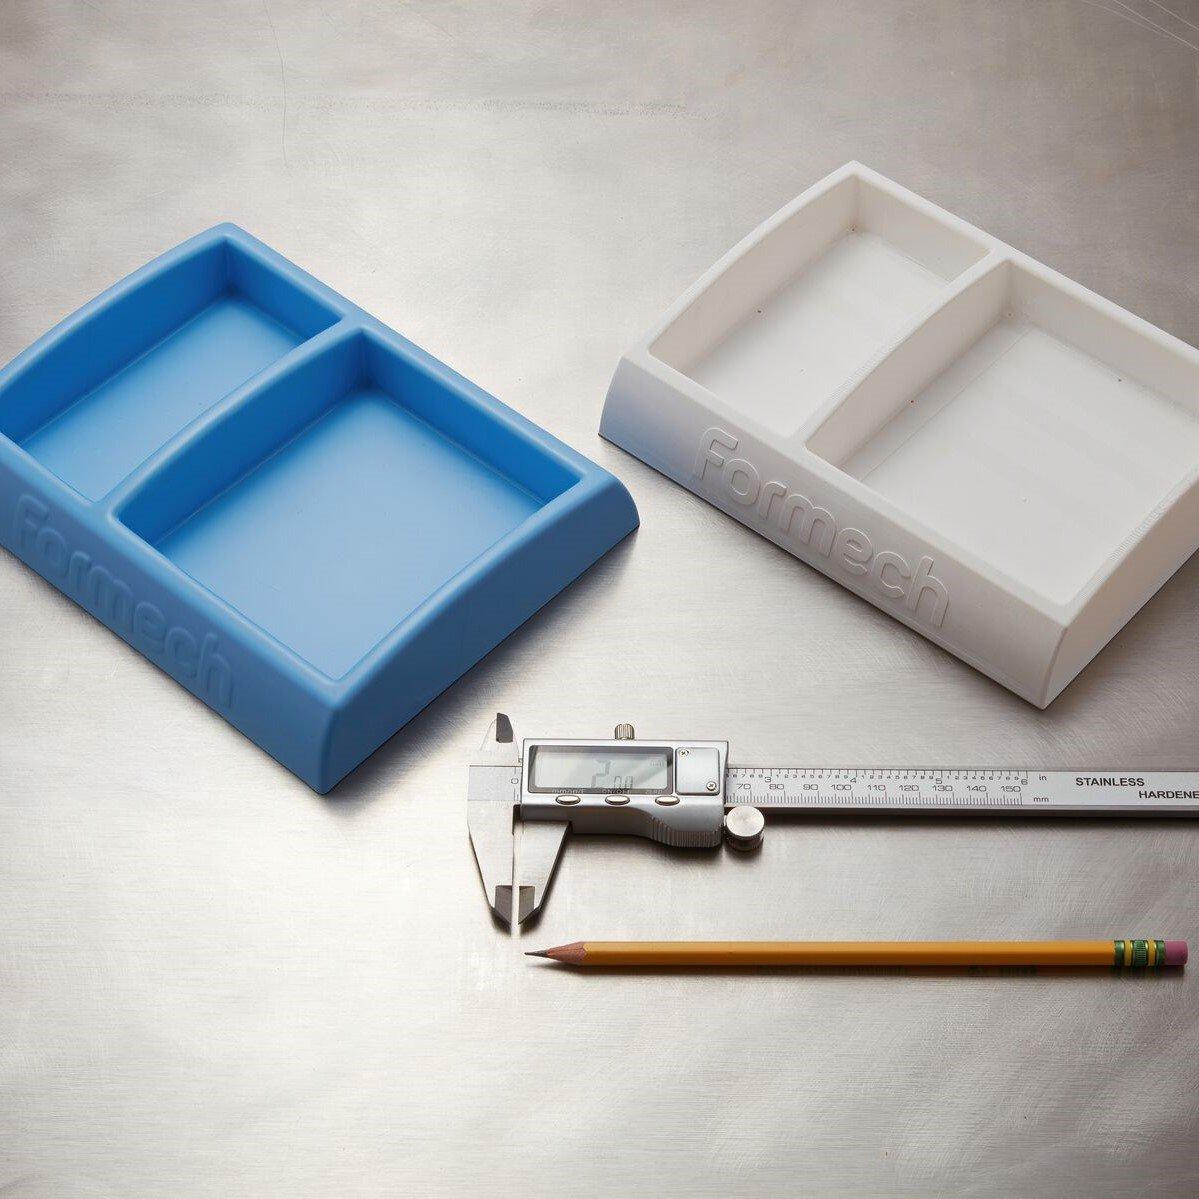 Formech thermoforming 3D printed mold with thermoformed part